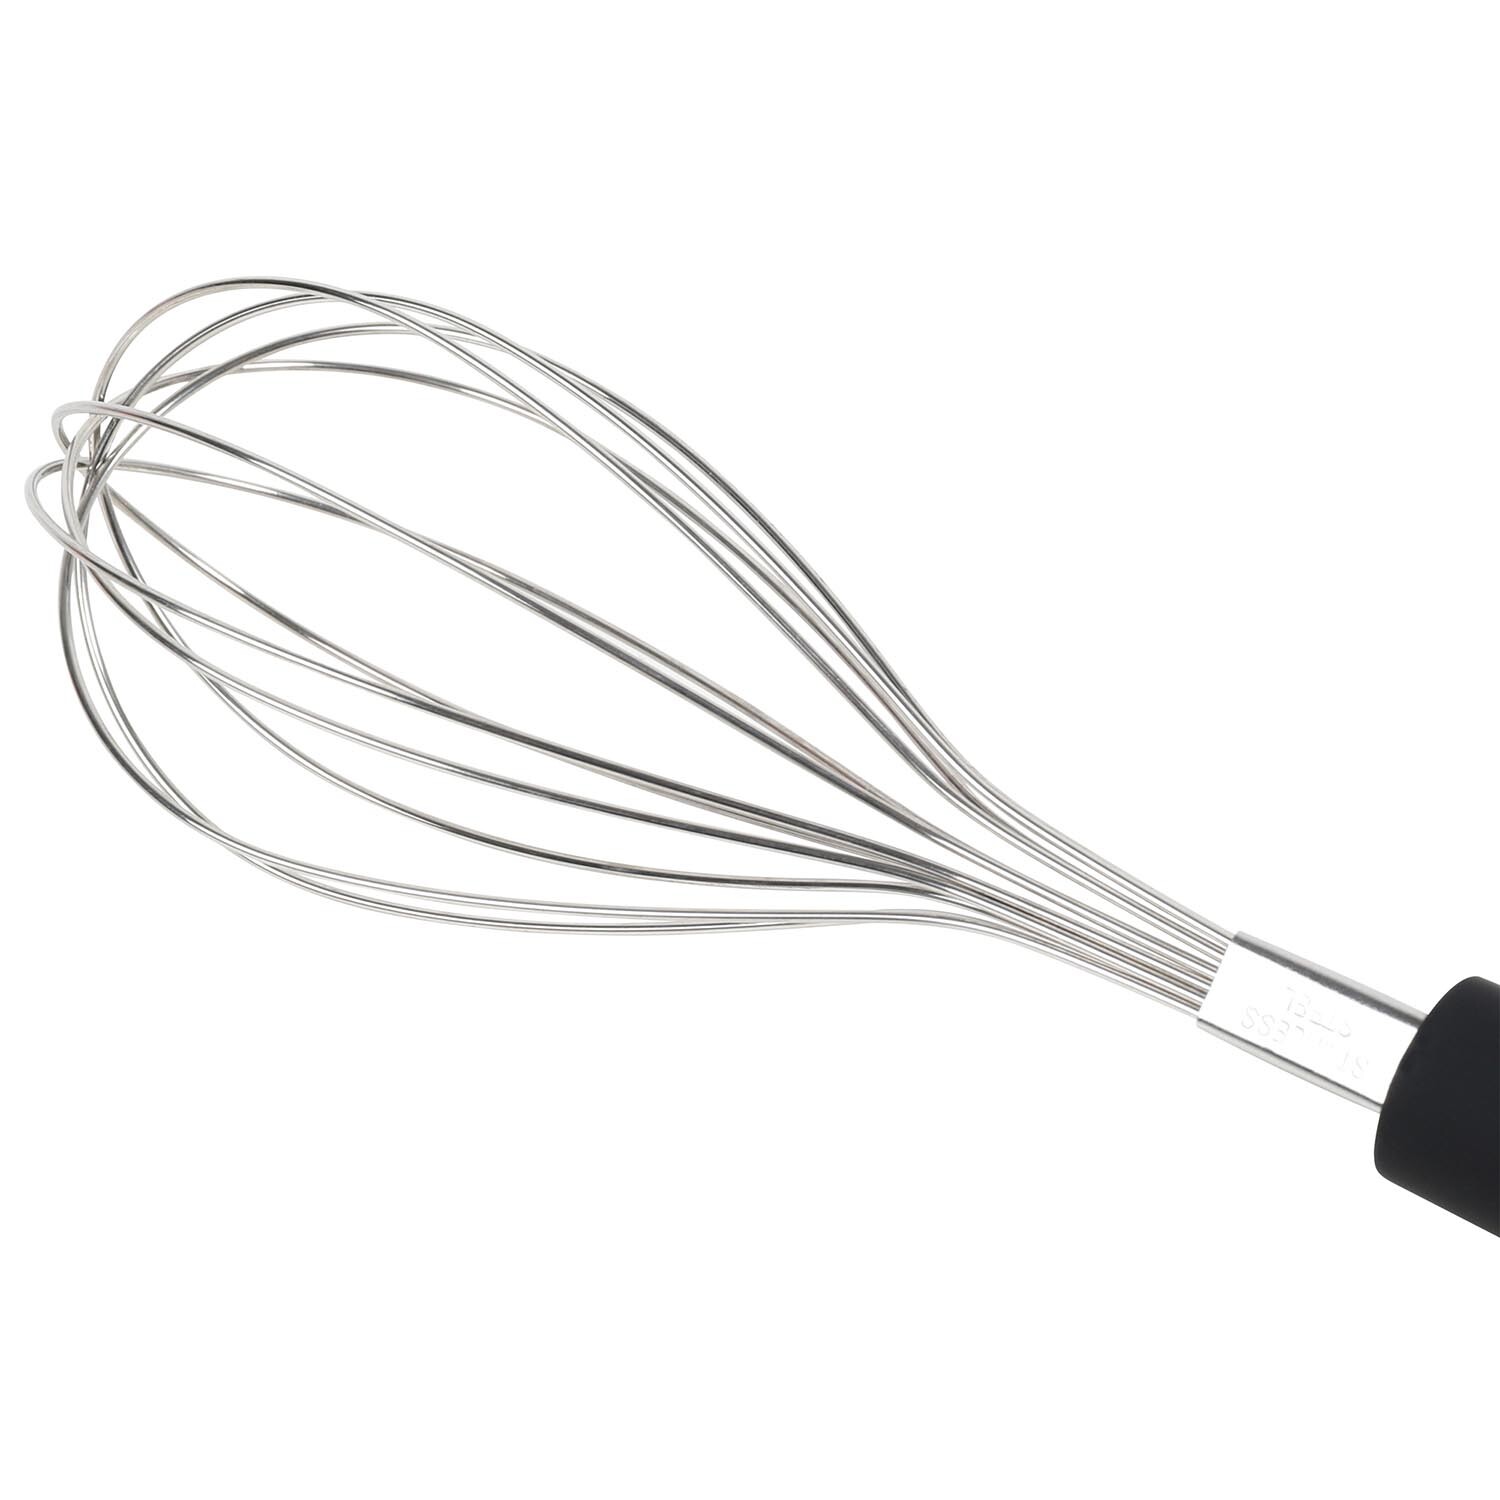 Kitchenmaster Whisk with Soft Touch Handle - Black Image 5